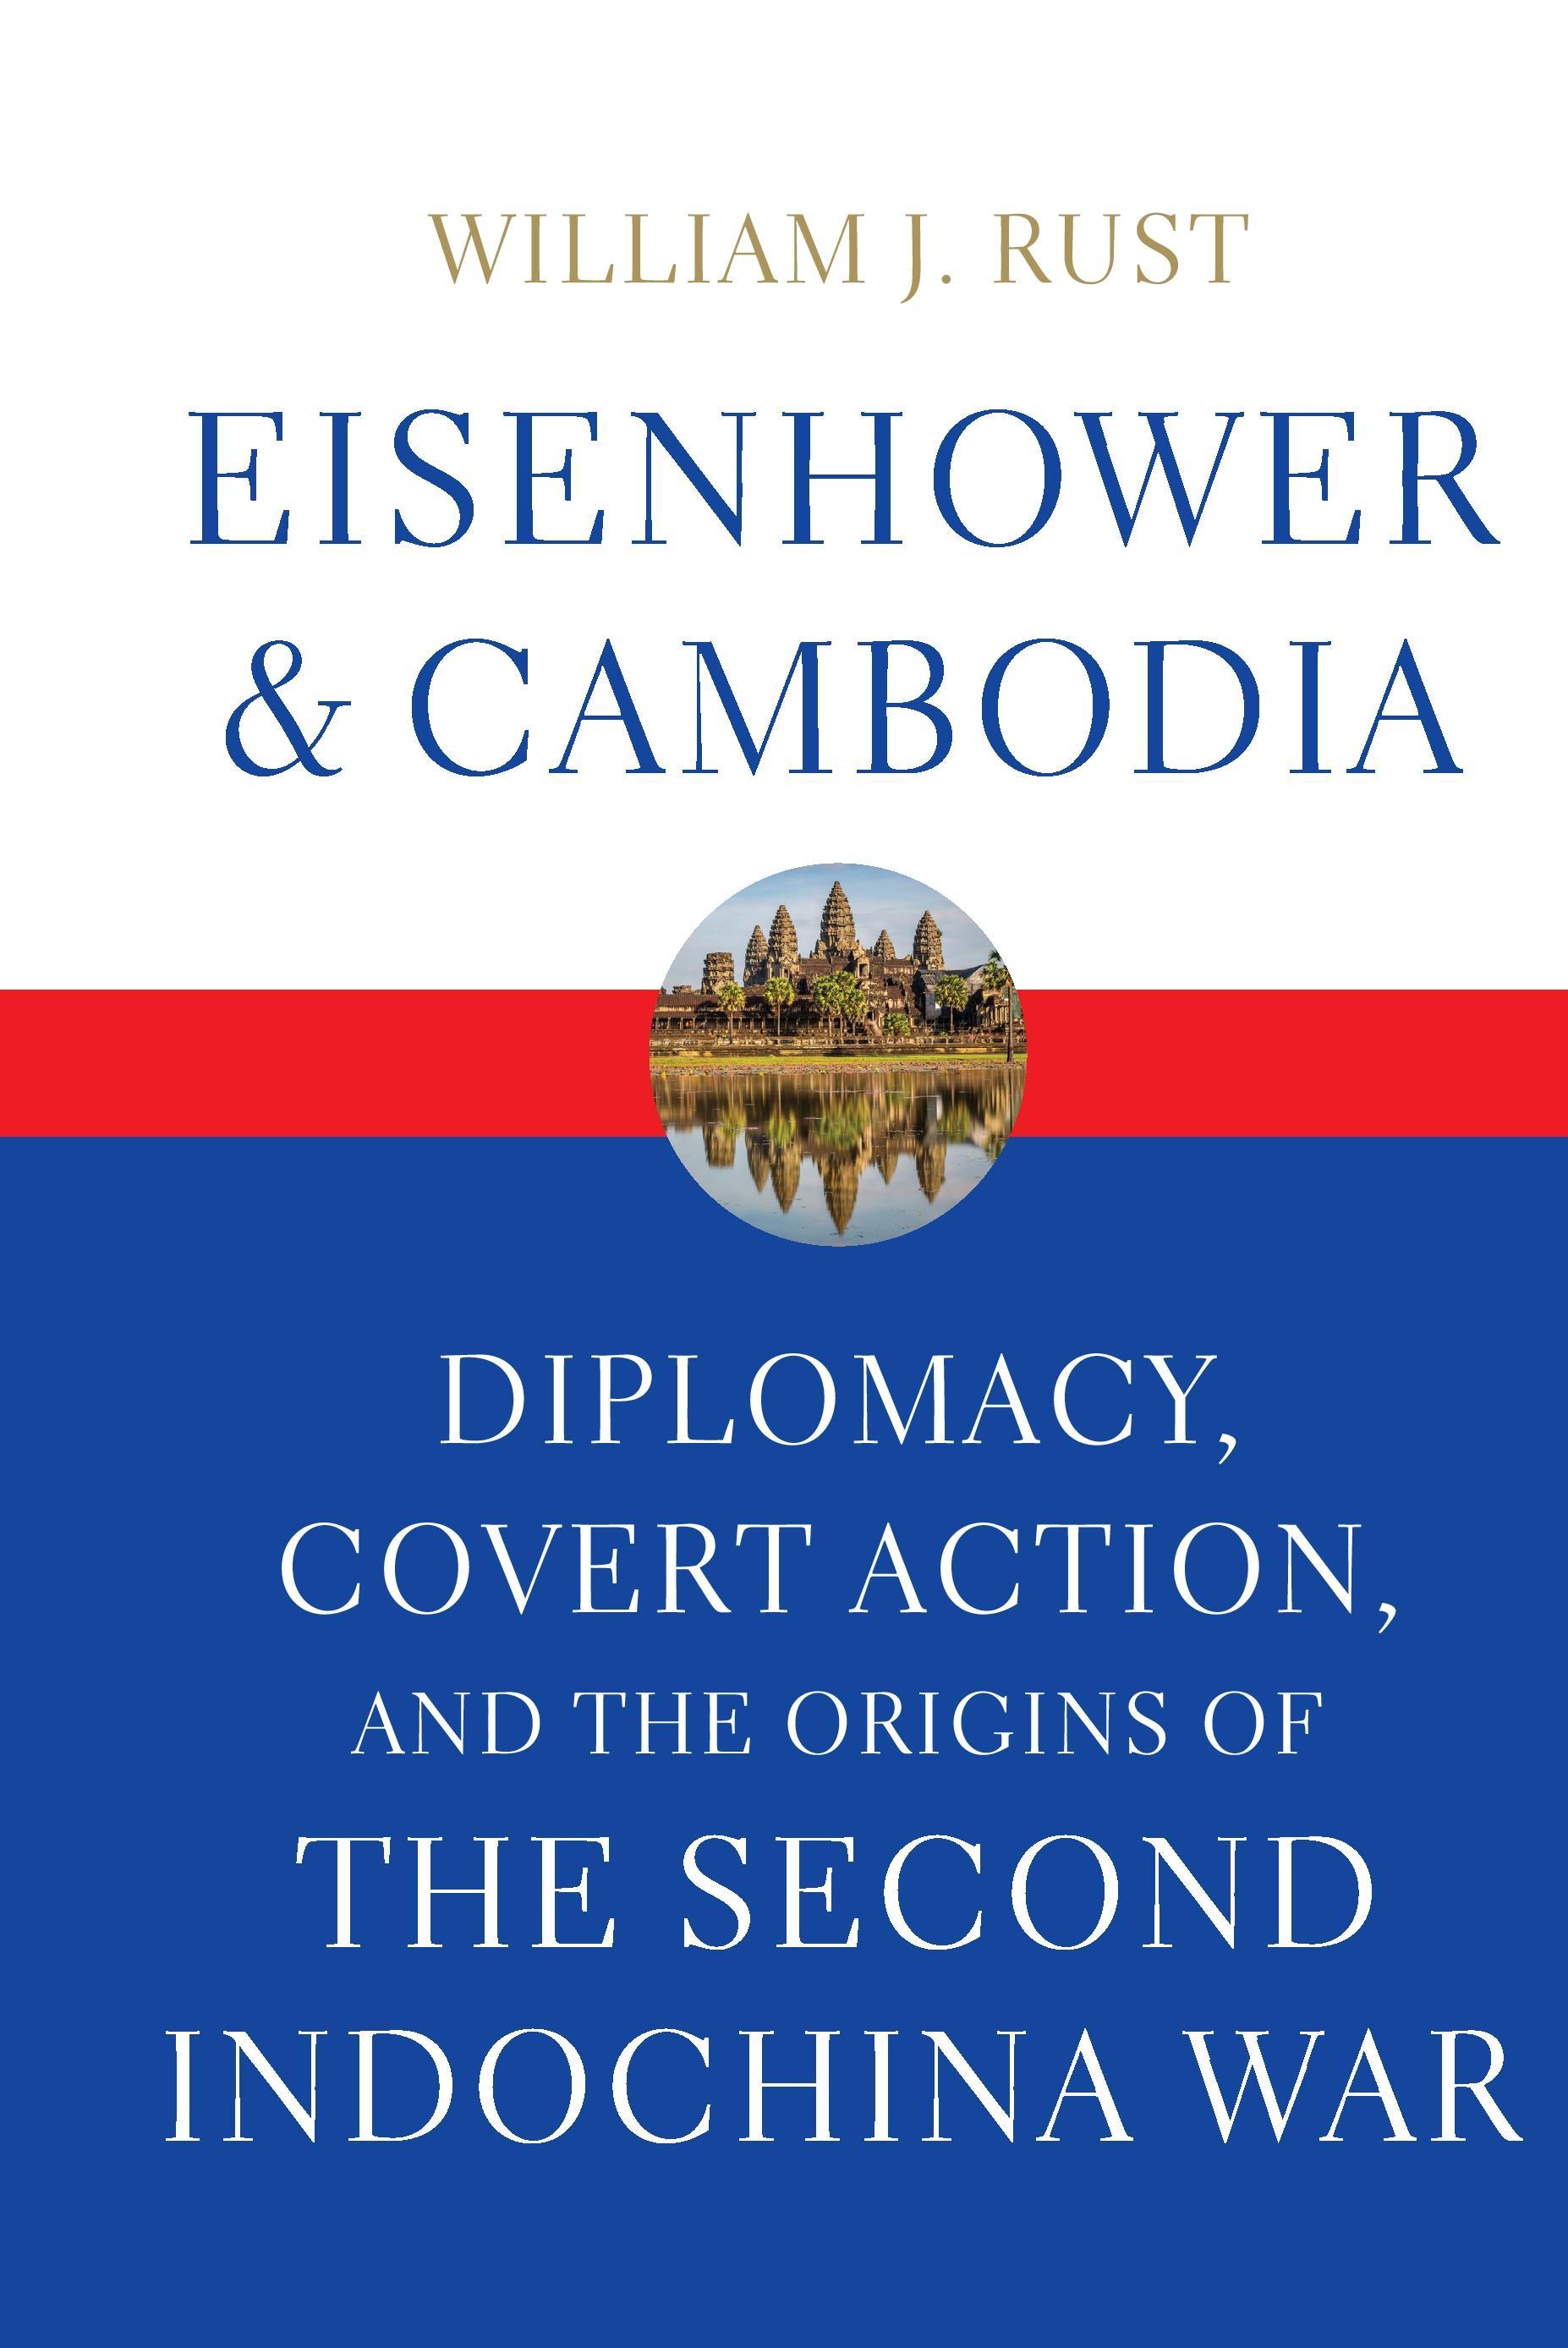 Eisenhower and Cambodia: Diplomacy, Covert Action, and the Origins of the Second Indochina War | William J. Rust | Buch | Studies in Conflict, Diplomacy | Englisch | 2016 | UNIV PR OF KENTUCKY - Rust, William J.